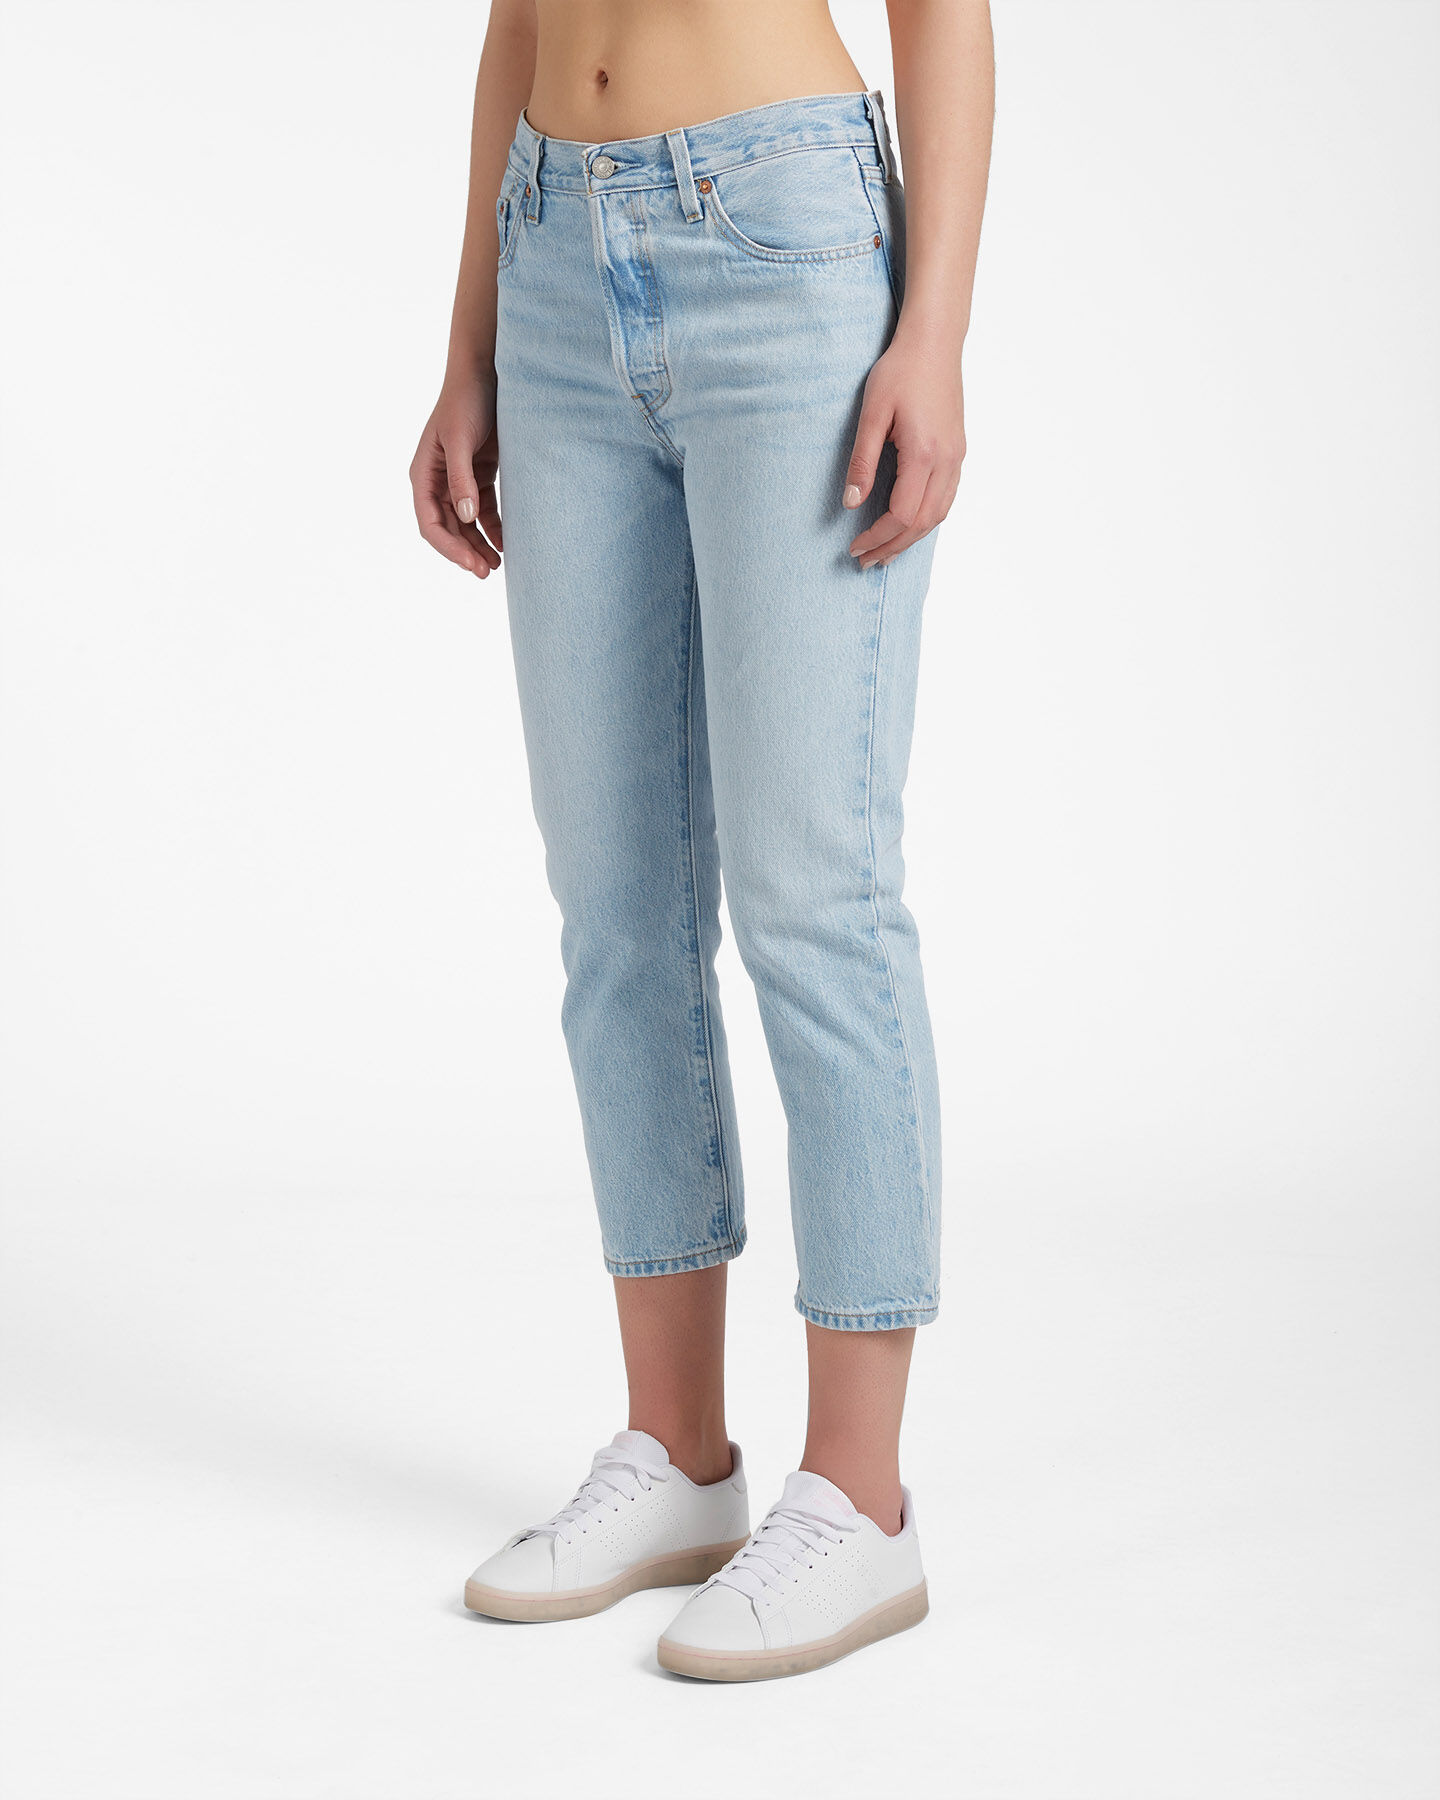  Jeans LEVI'S 501 CROP HIGH RISE L26 W S4088777|0124|26 scatto 2